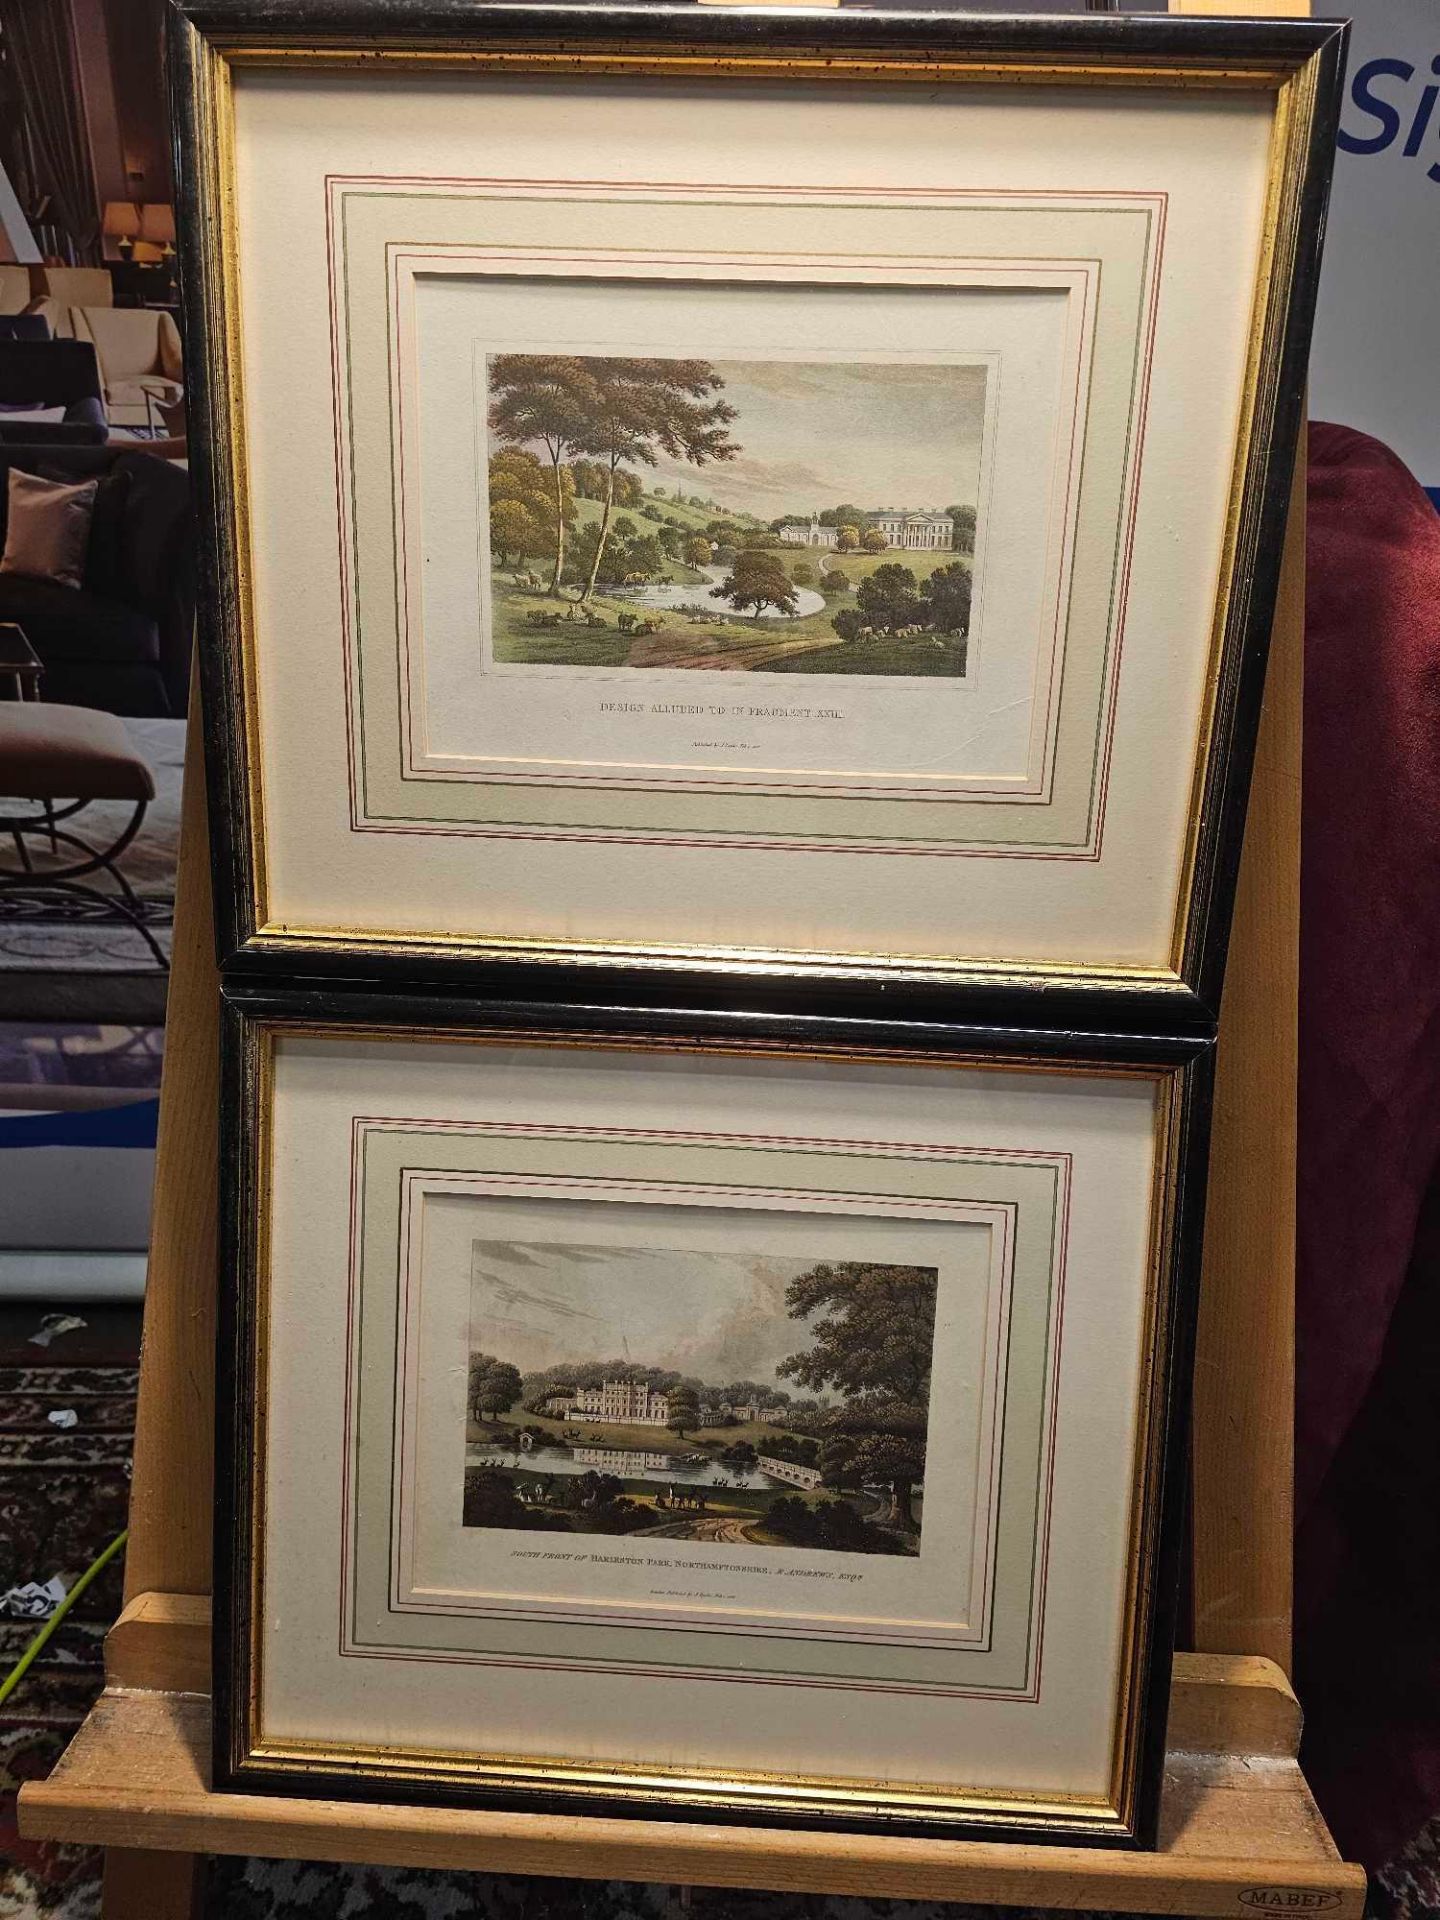 2 x Framed Landscape Prints (1) Design Alluded To In Fragment XXIII From Fragments On The Theory And